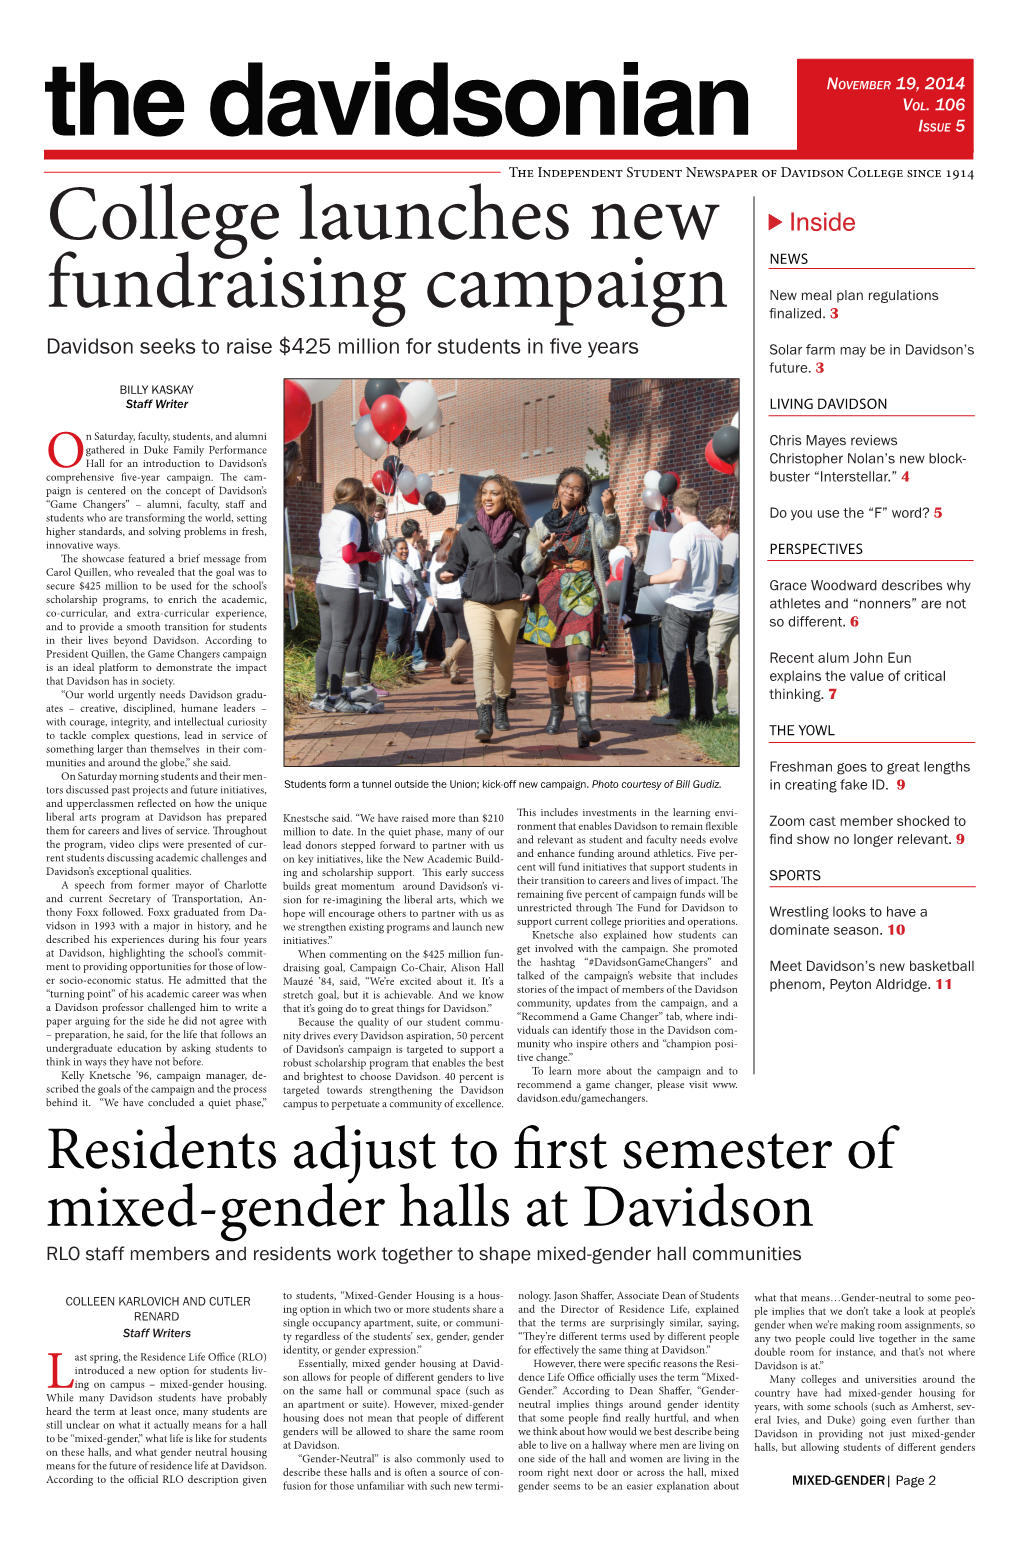 College Launches New Fundraising Campaign